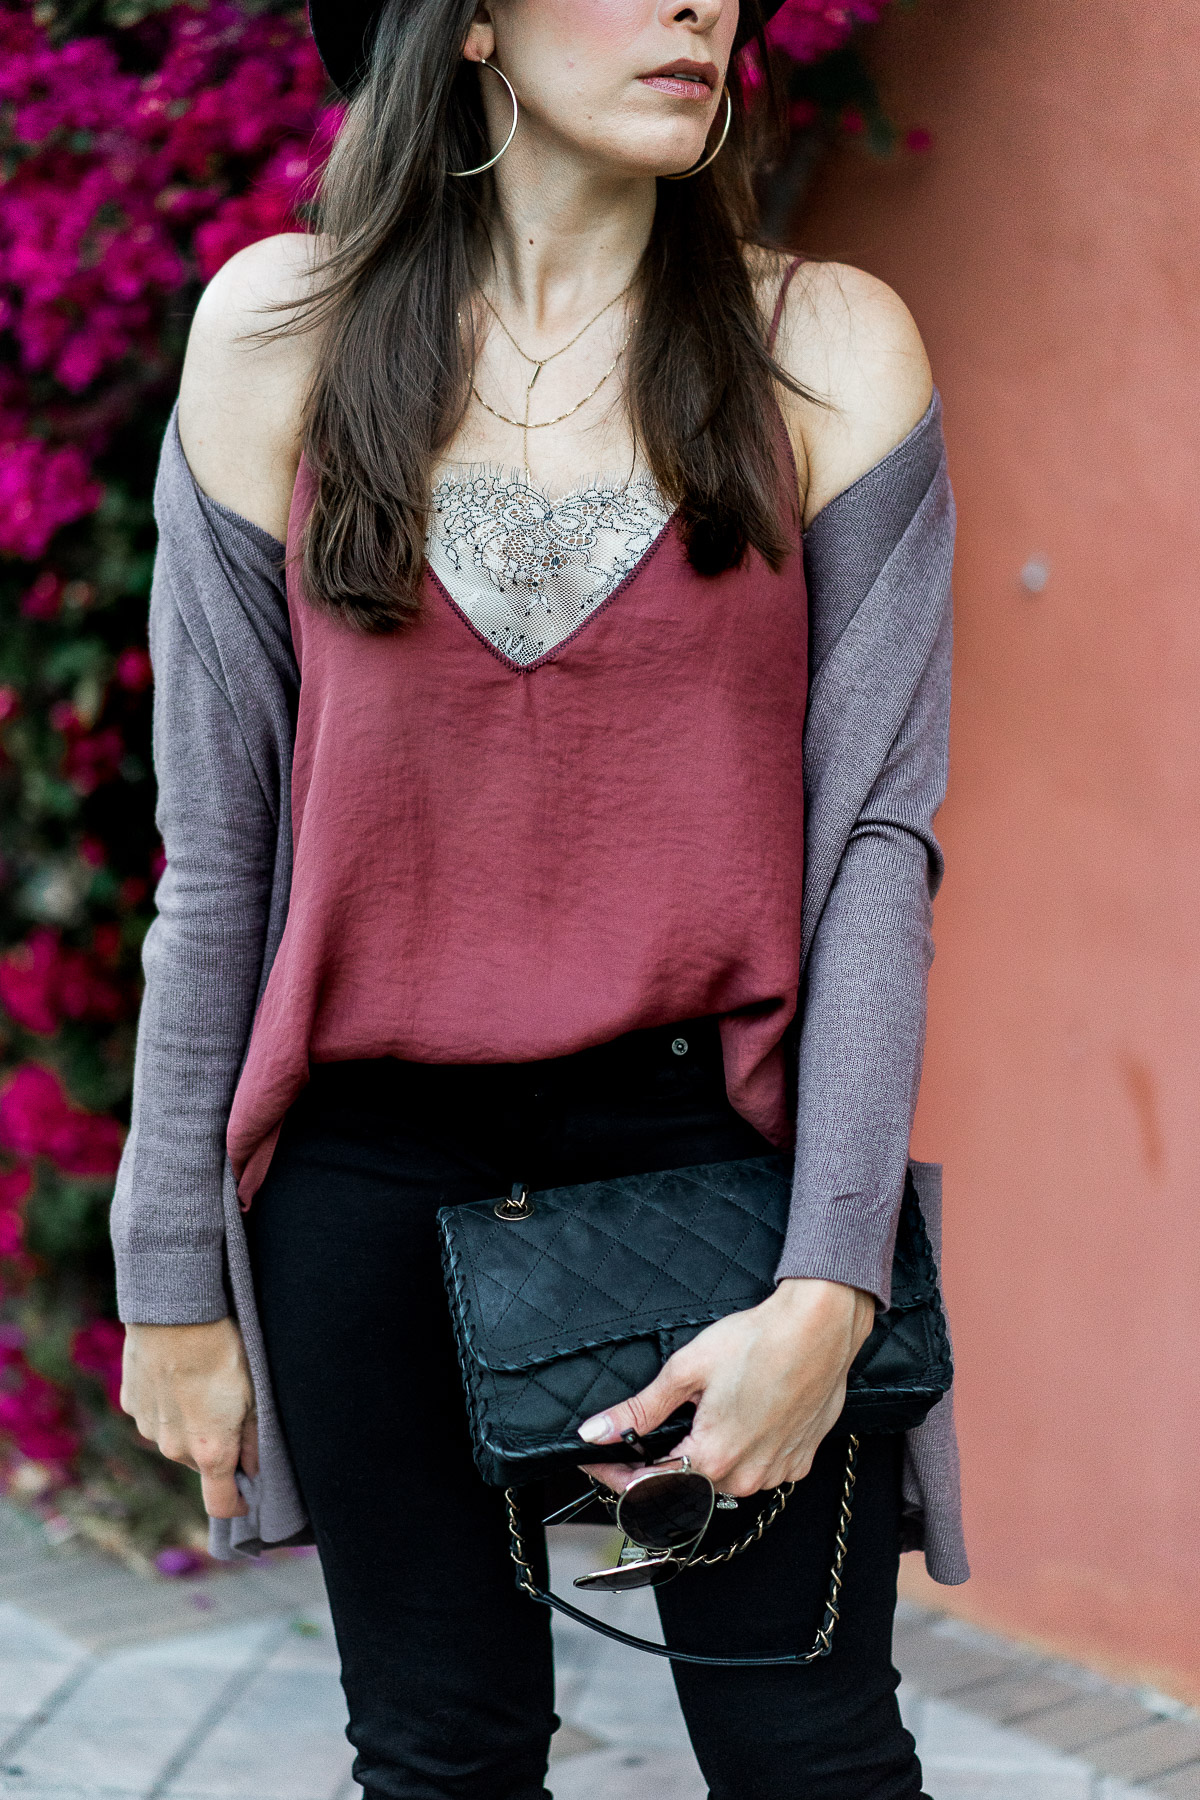 Details on Free People Deep V bandeau cami as styled by Amanda from AGlamLifestyle blog